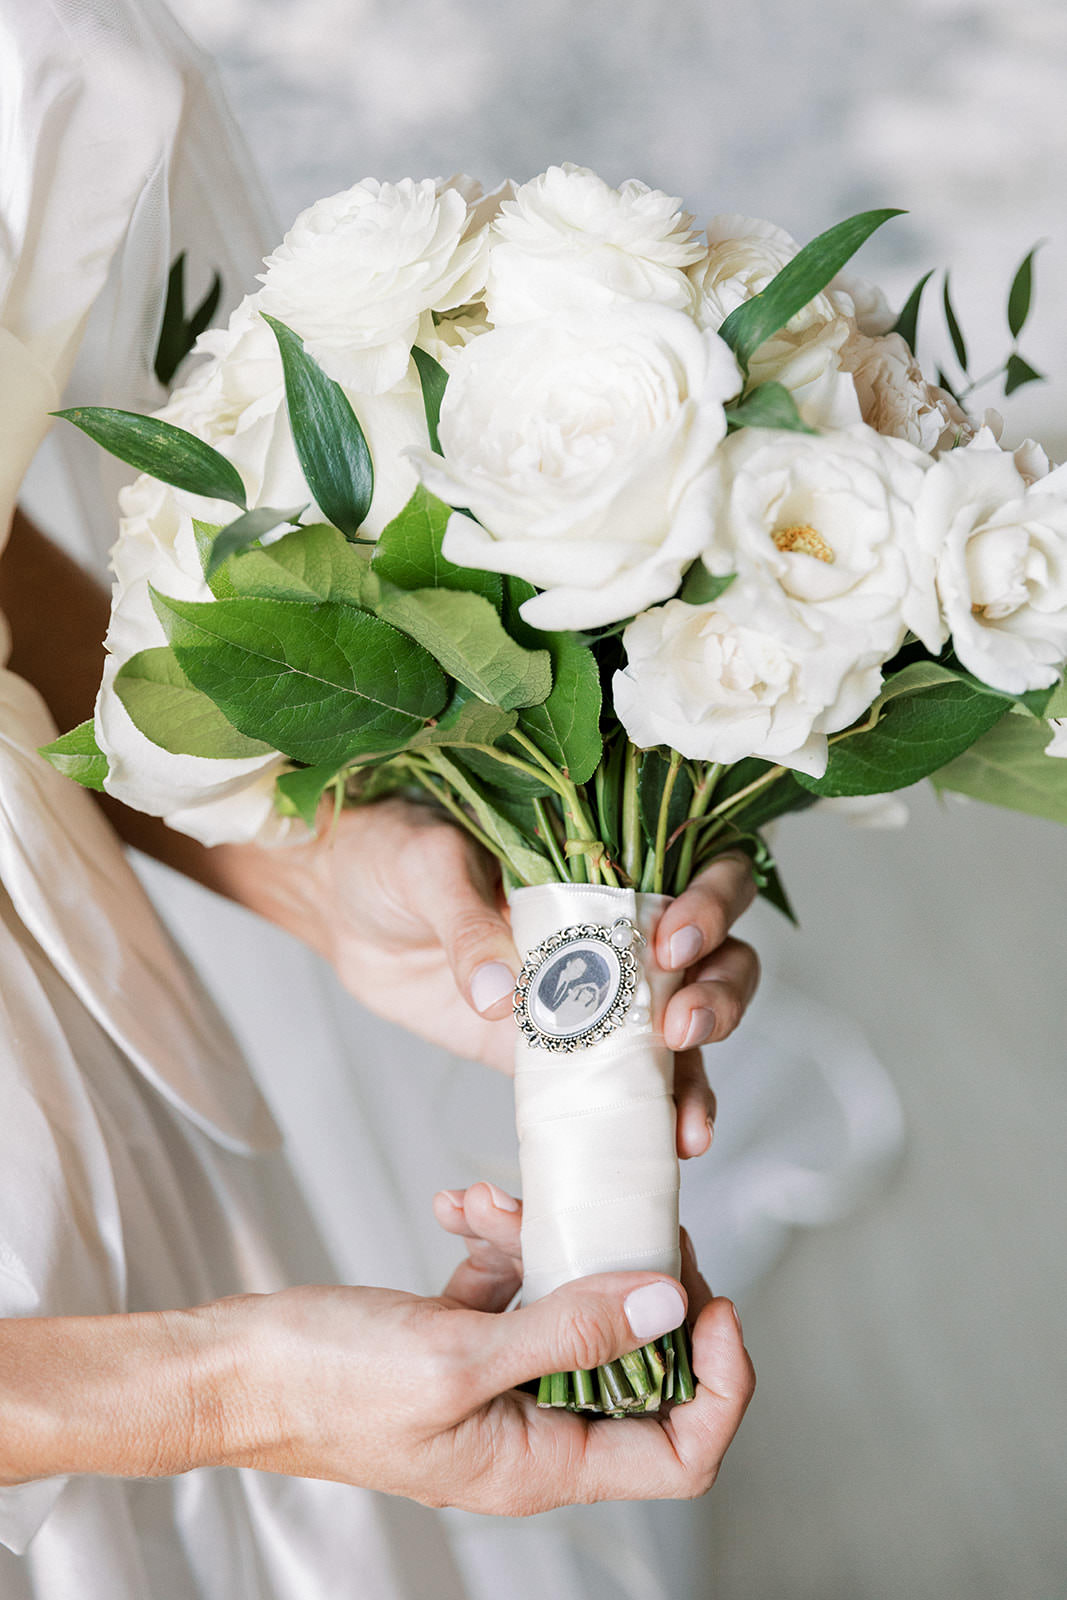 Bride Holding Classic All White Roses Bouquet with Greenery Leaves and Memory Remembrance Bouquet Charm | Tampa Bay Wedding Florist Botanica International Design Studio